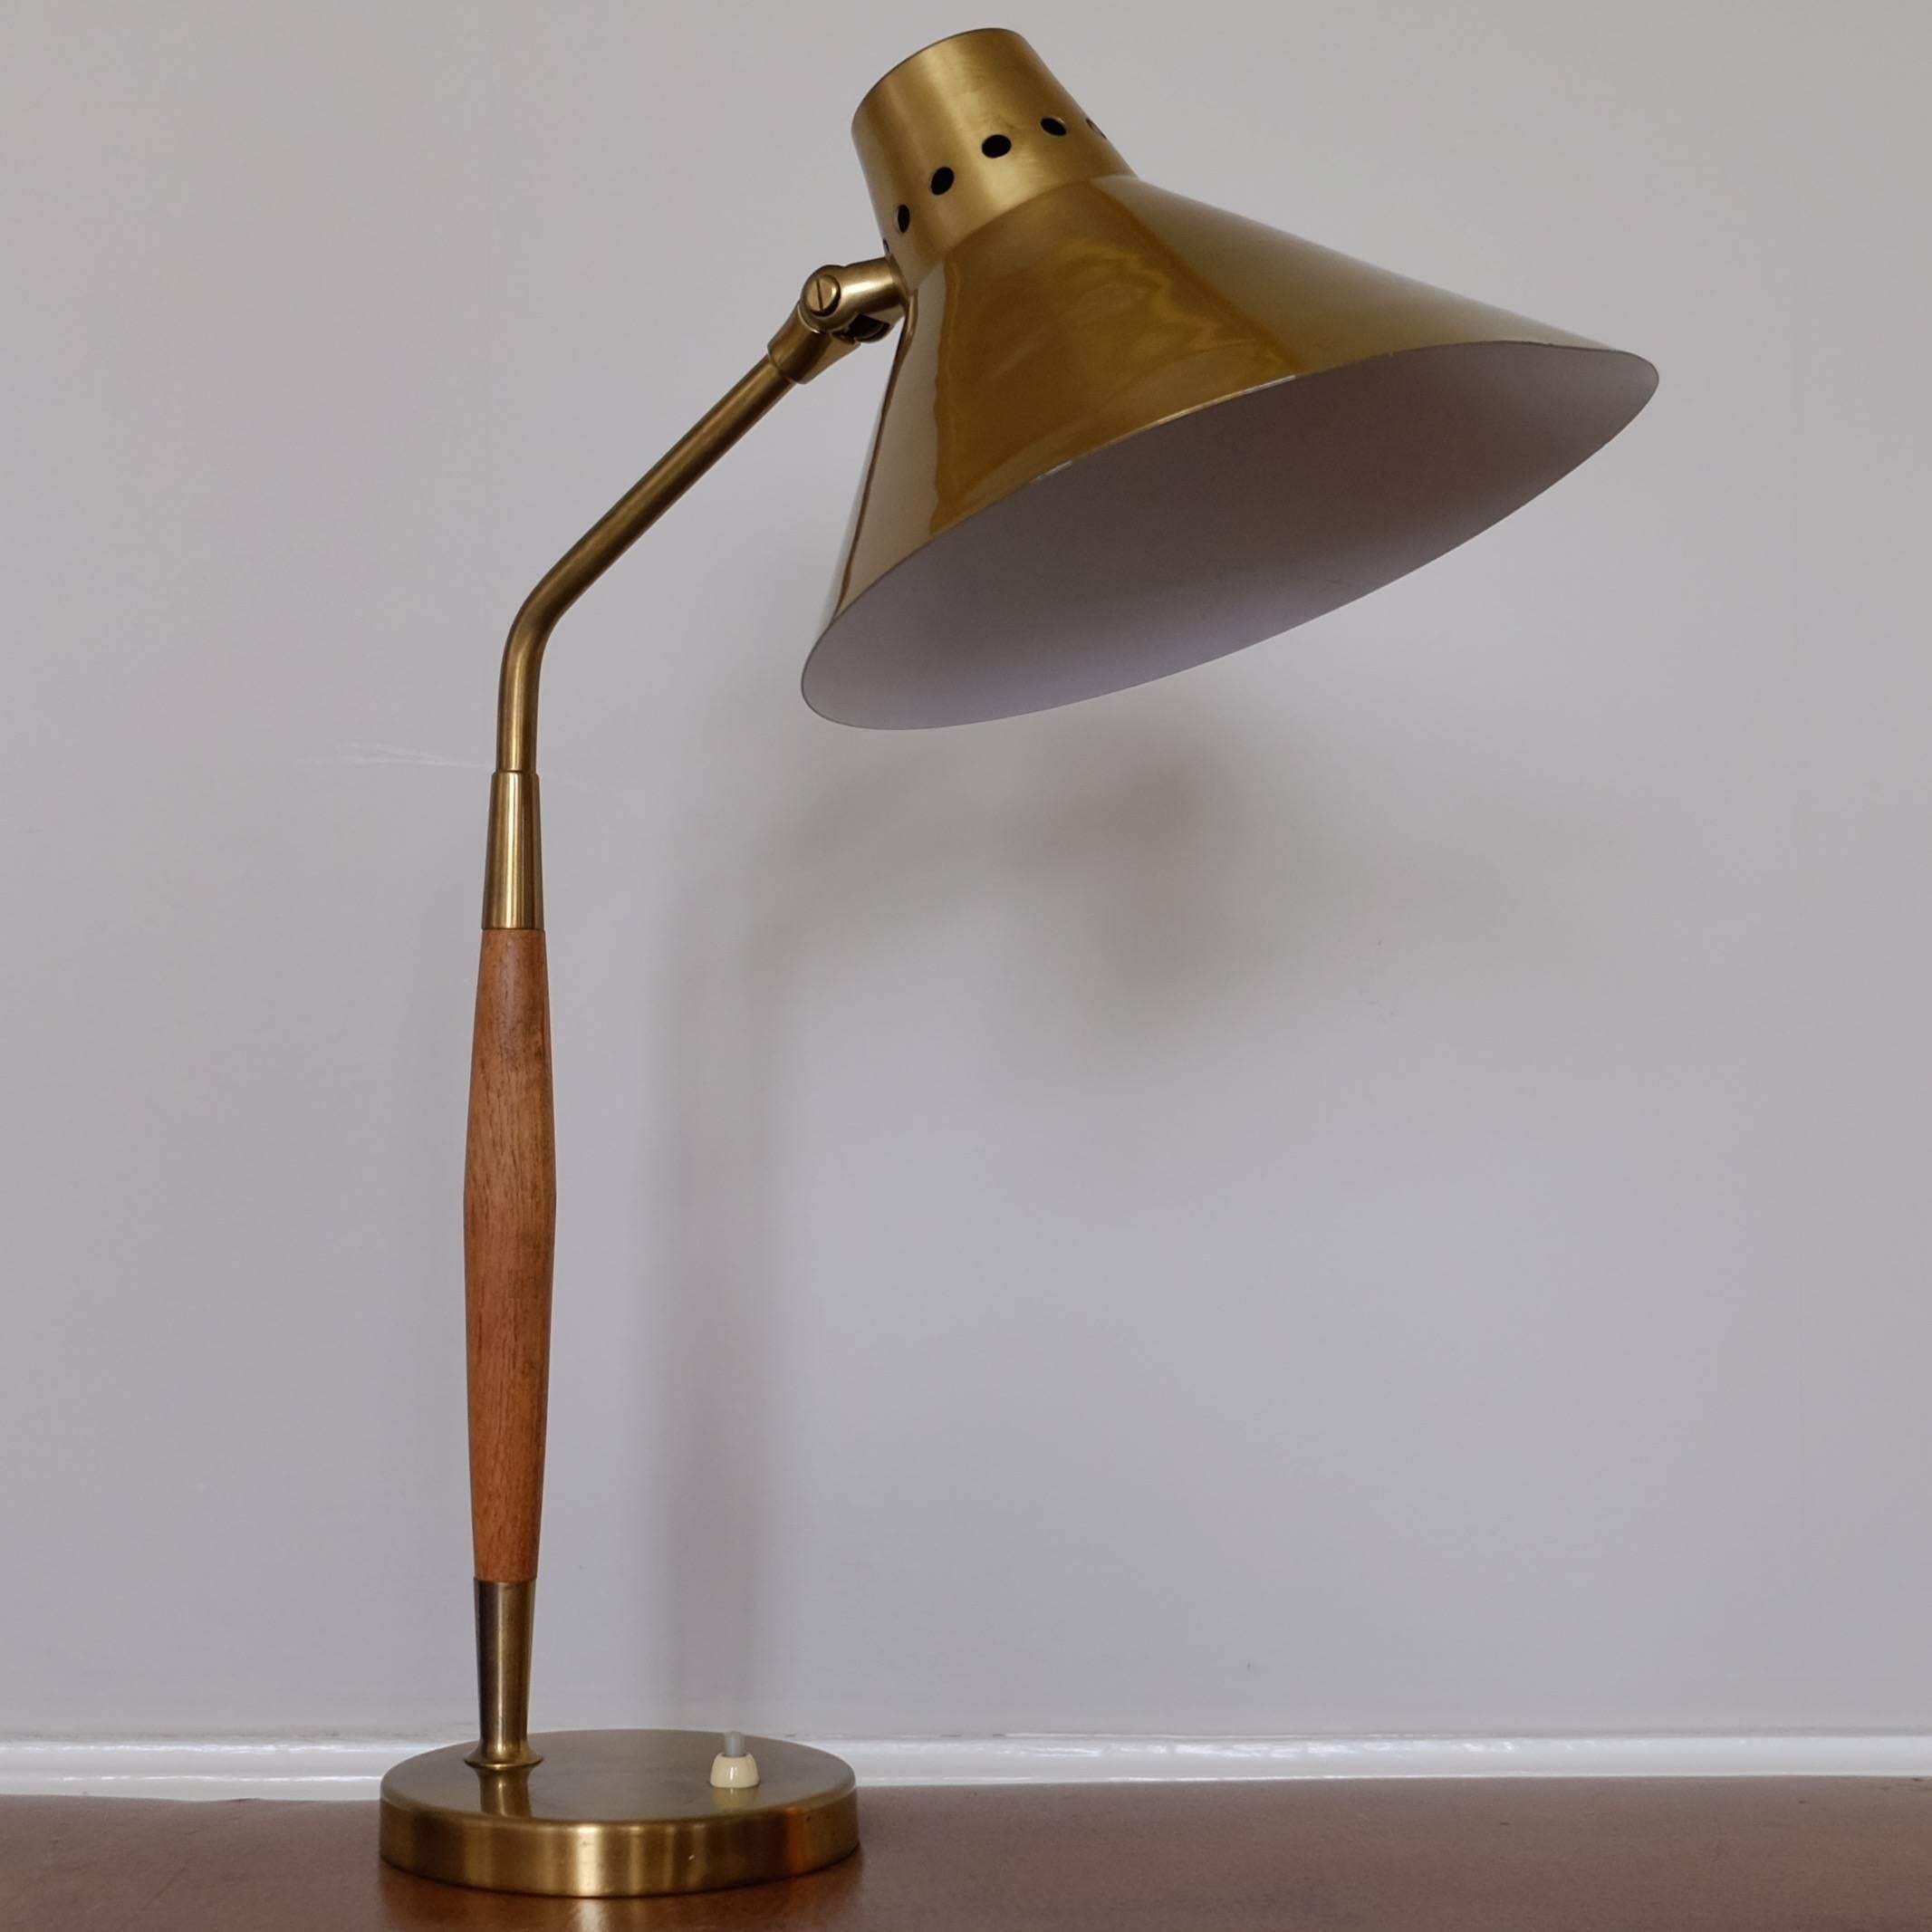 Swedish table lamp in teak and brass by Boréns, 1950s. Great patina and adjustable shade.
 